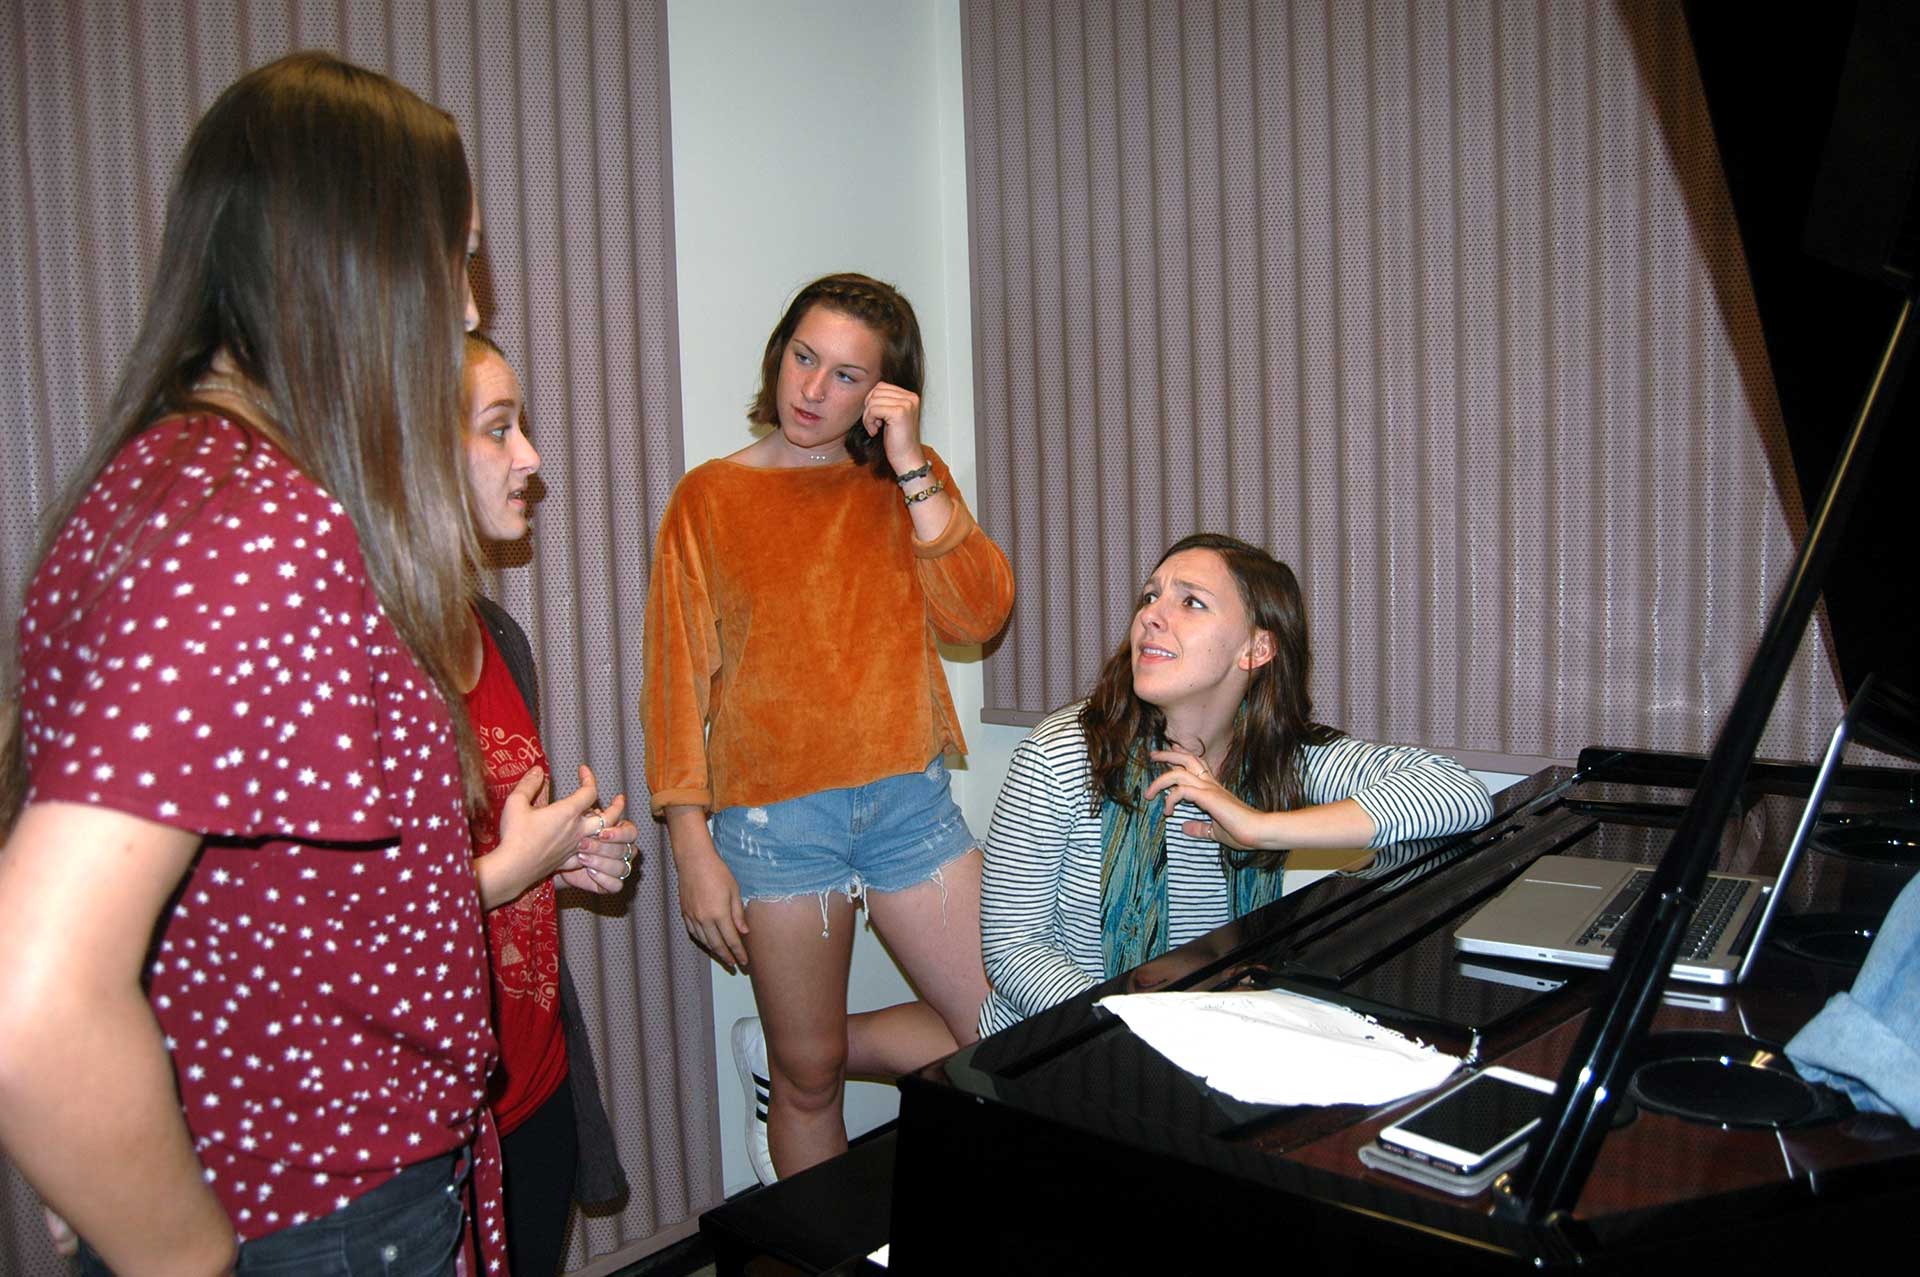 October 8, 2017 | San Luis Obispo, CA | Meanwhile, the altos retreat to a smaller practice room
for their sectional. Nutrition senior Jennifer Gsell (right) debates with fellow alto singer,
architecture senior Paris Allen (second from left.) The ladies can’t decide on whether a
particular note they sing should “fit the chord” or be dissonant. Gsell claims, “I don’t think that’s
how it’s all supposed to fit together. It doesn’t sound quite right.” They continue to practice the
same vocal line substituting either note.